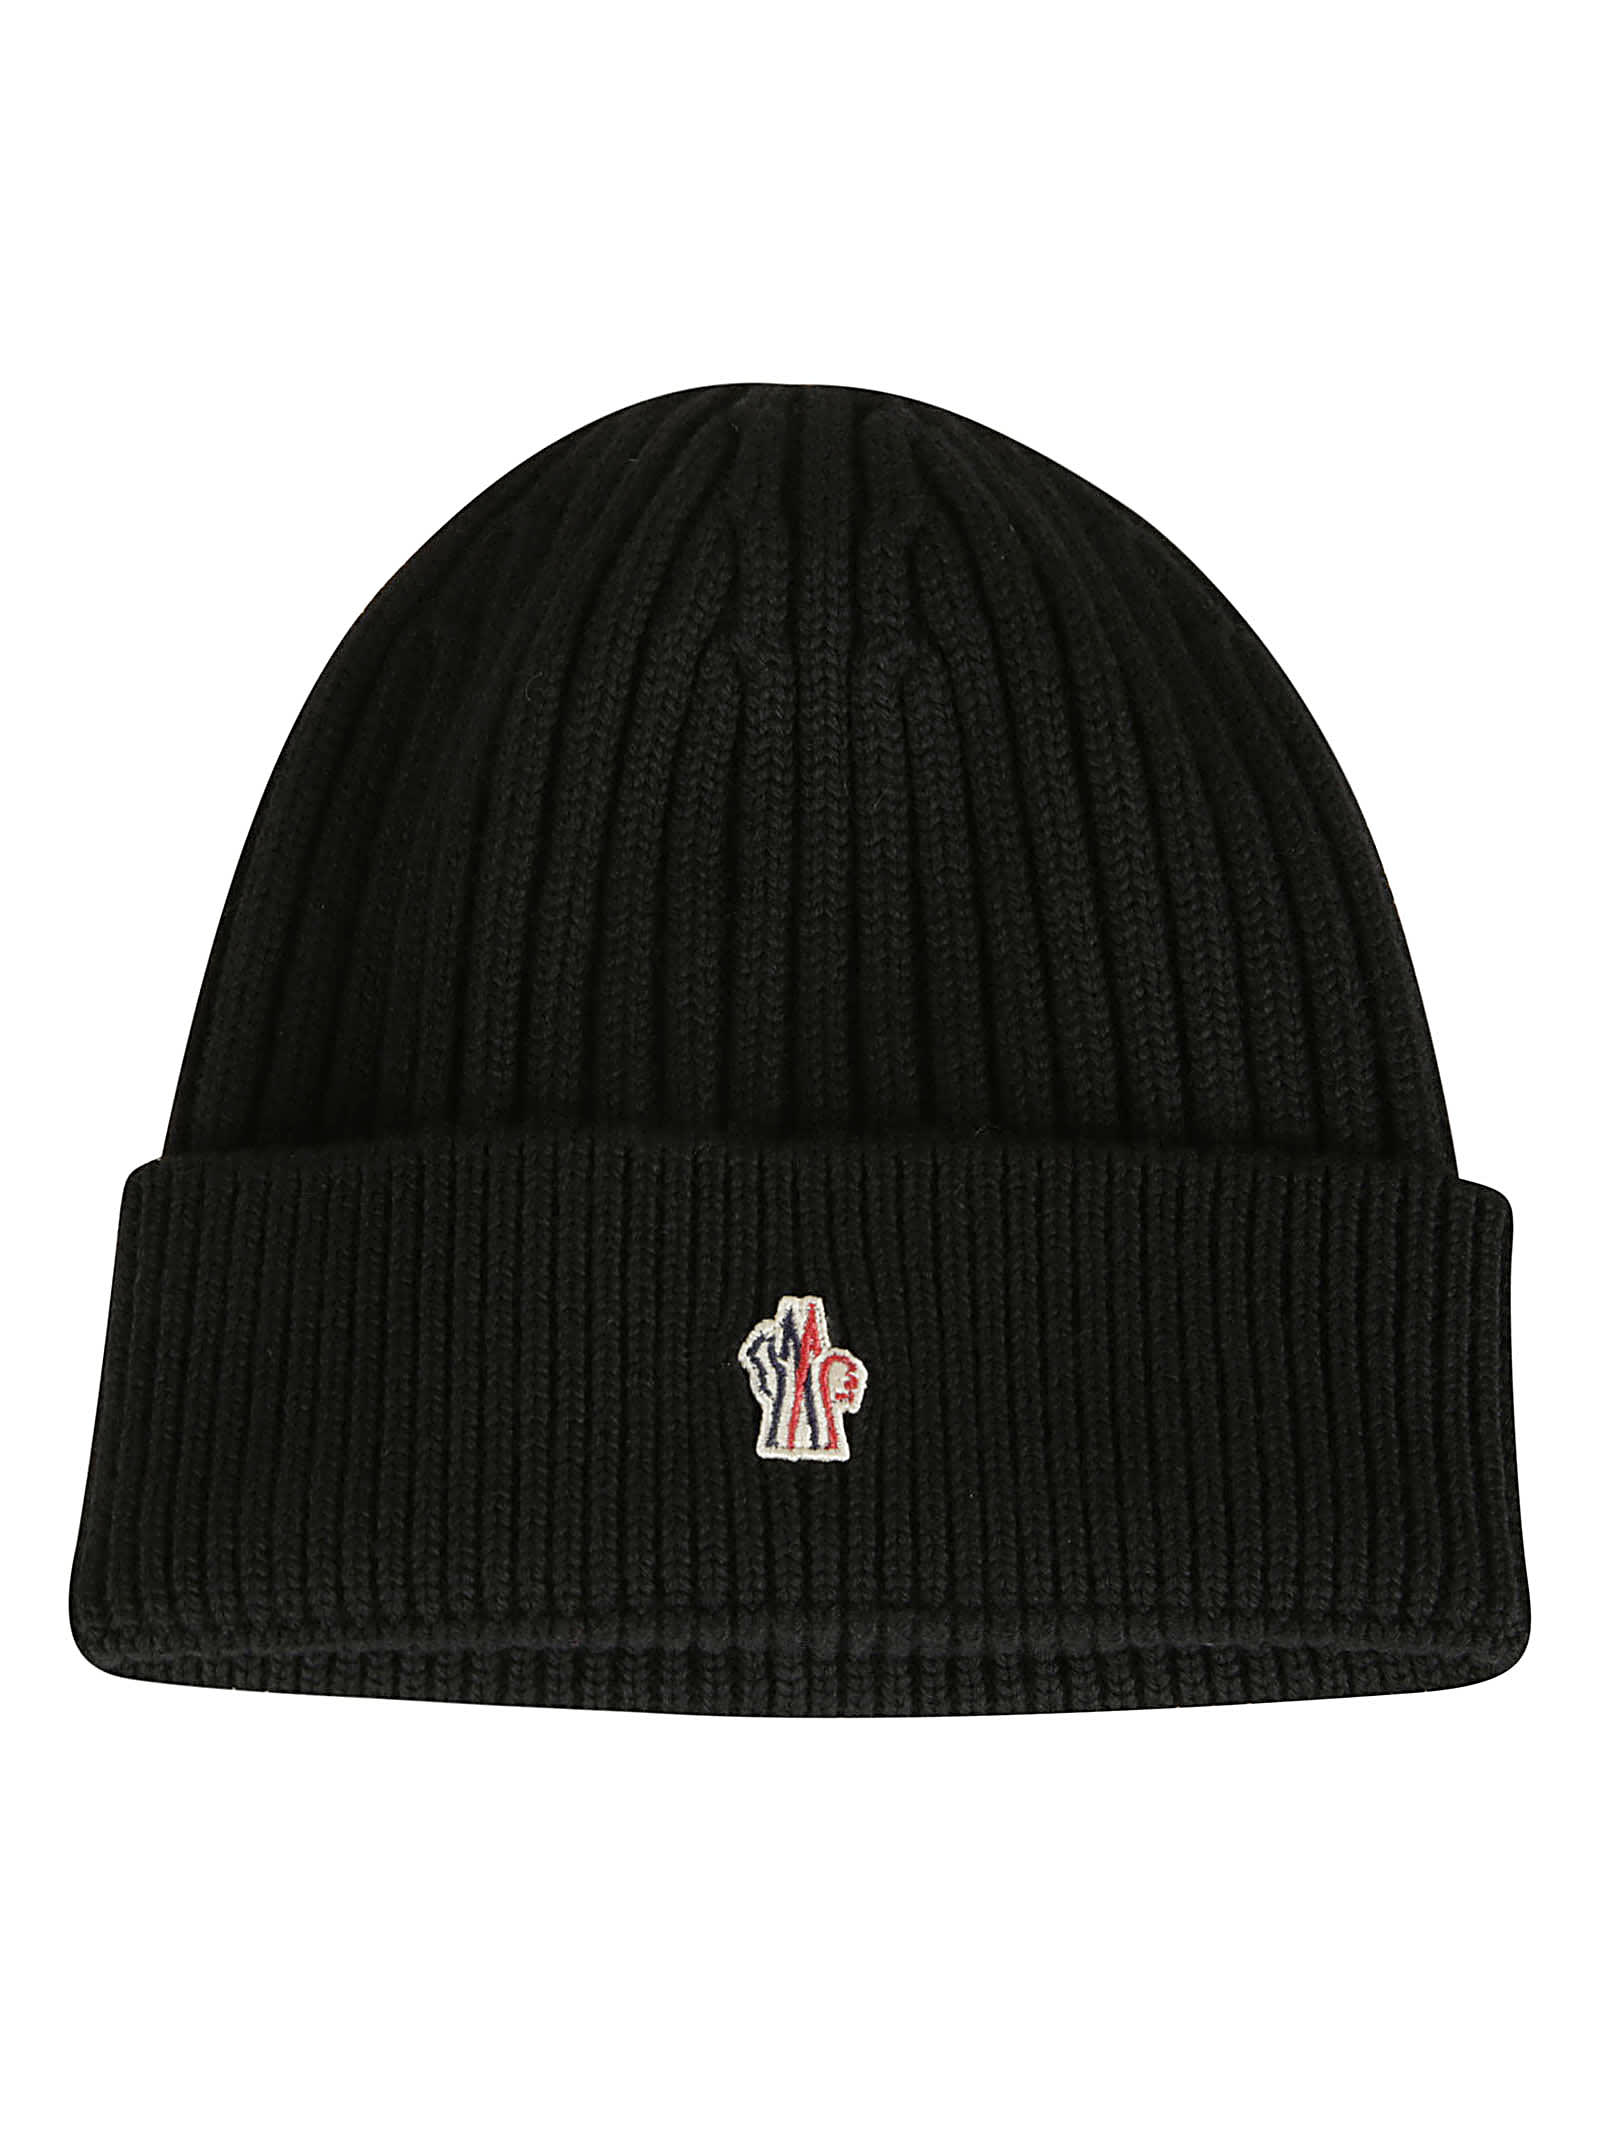 Moncler Grenoble Logo Patched Knit Beanie